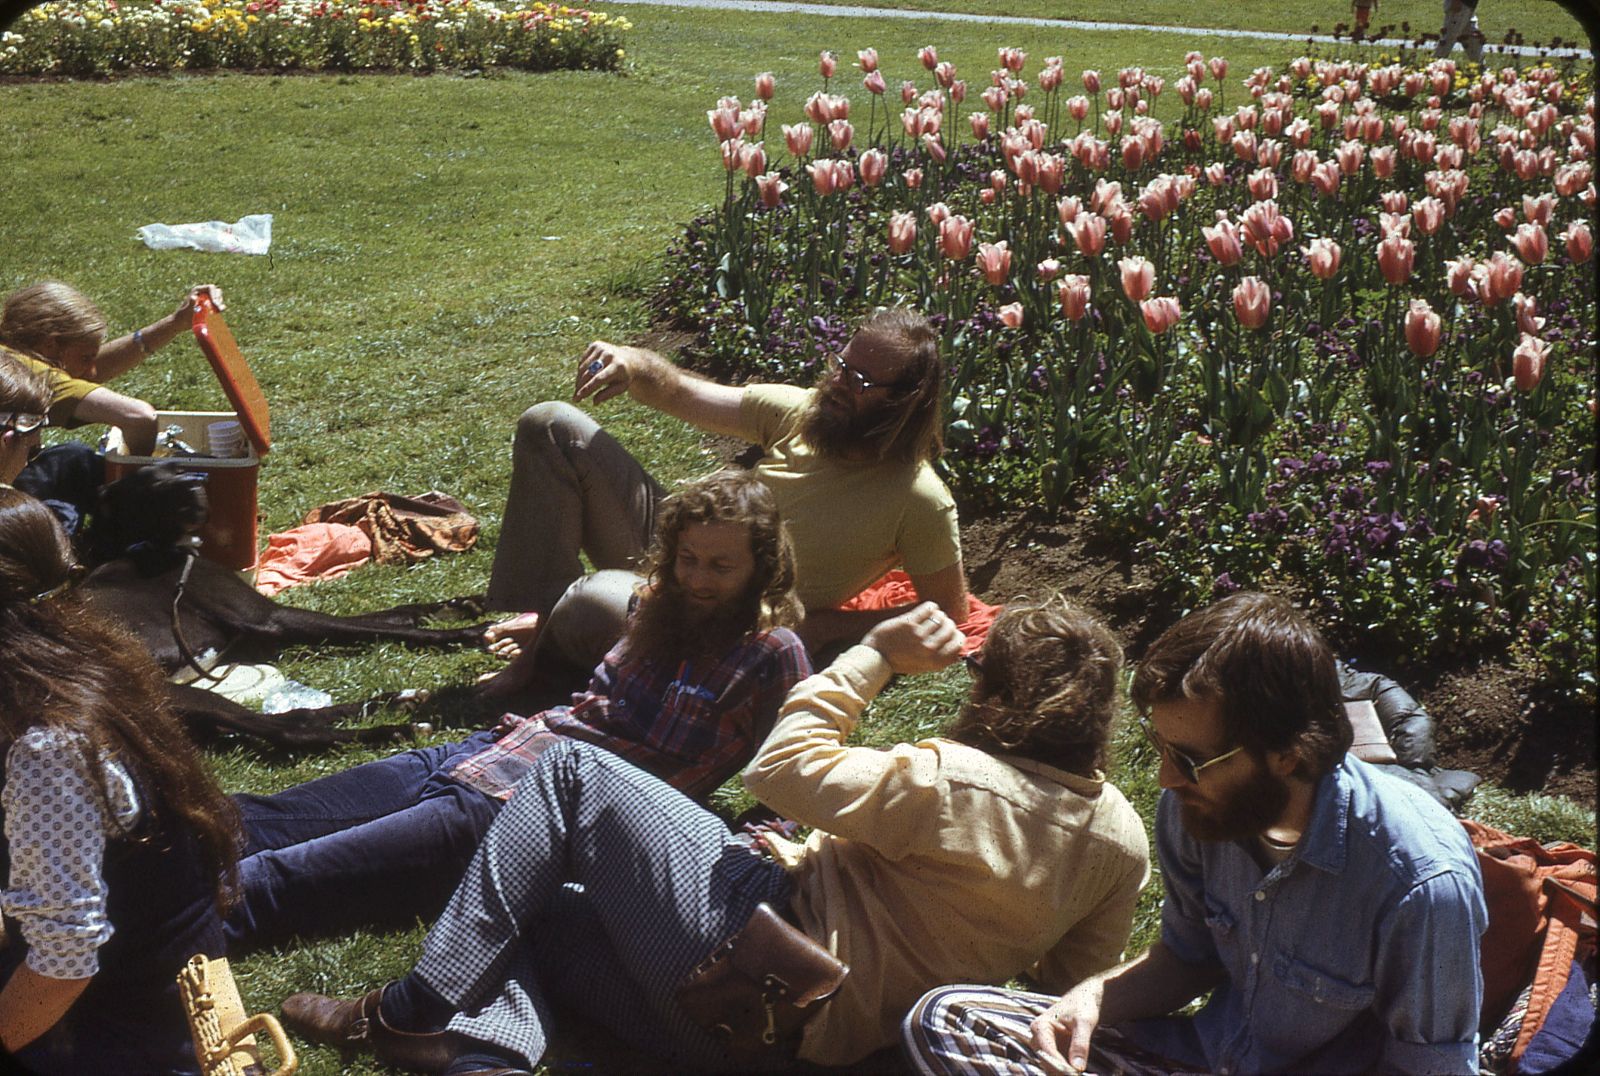 Jim Gray with former colleagues of the CAL Timesharing project at U.C. Berkeley, Golden Gate Park, April 1974